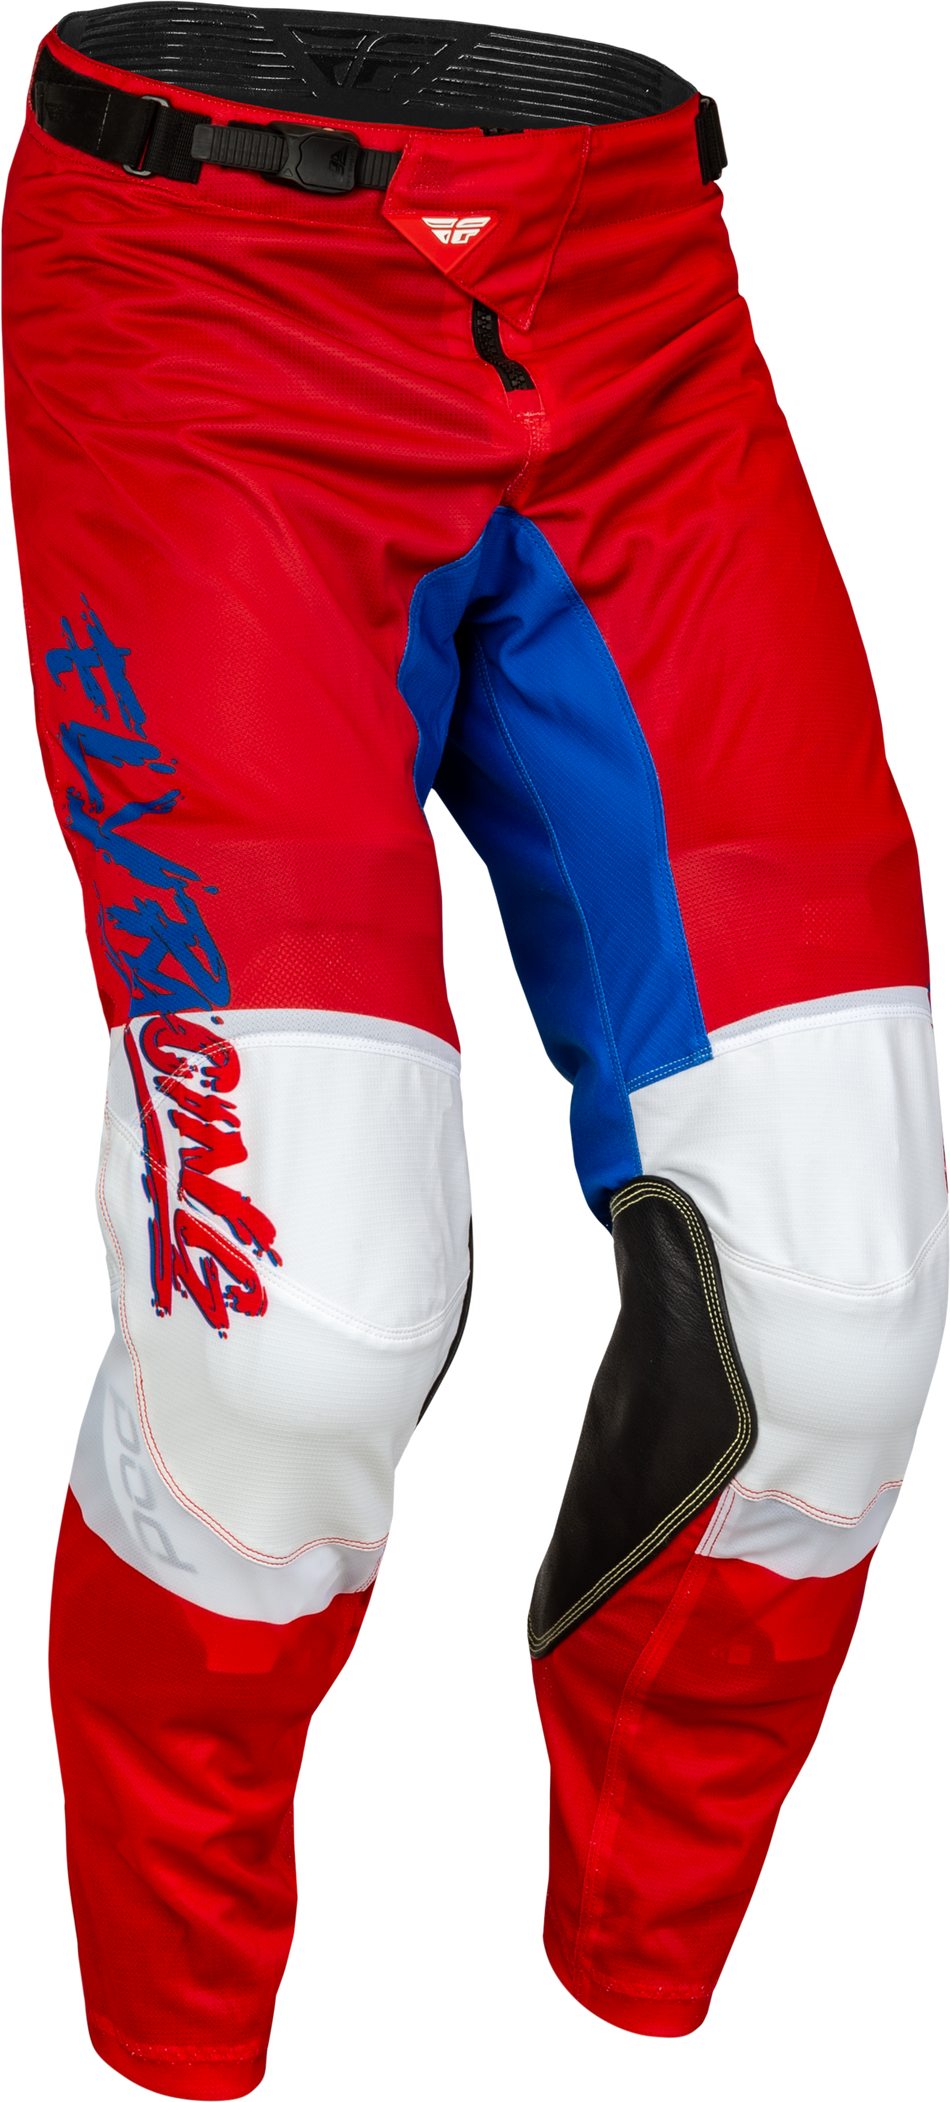 FLY RACING Youth Kinetic Mesh Khaos Pants Red/White/Blue Sz 22 377-34422